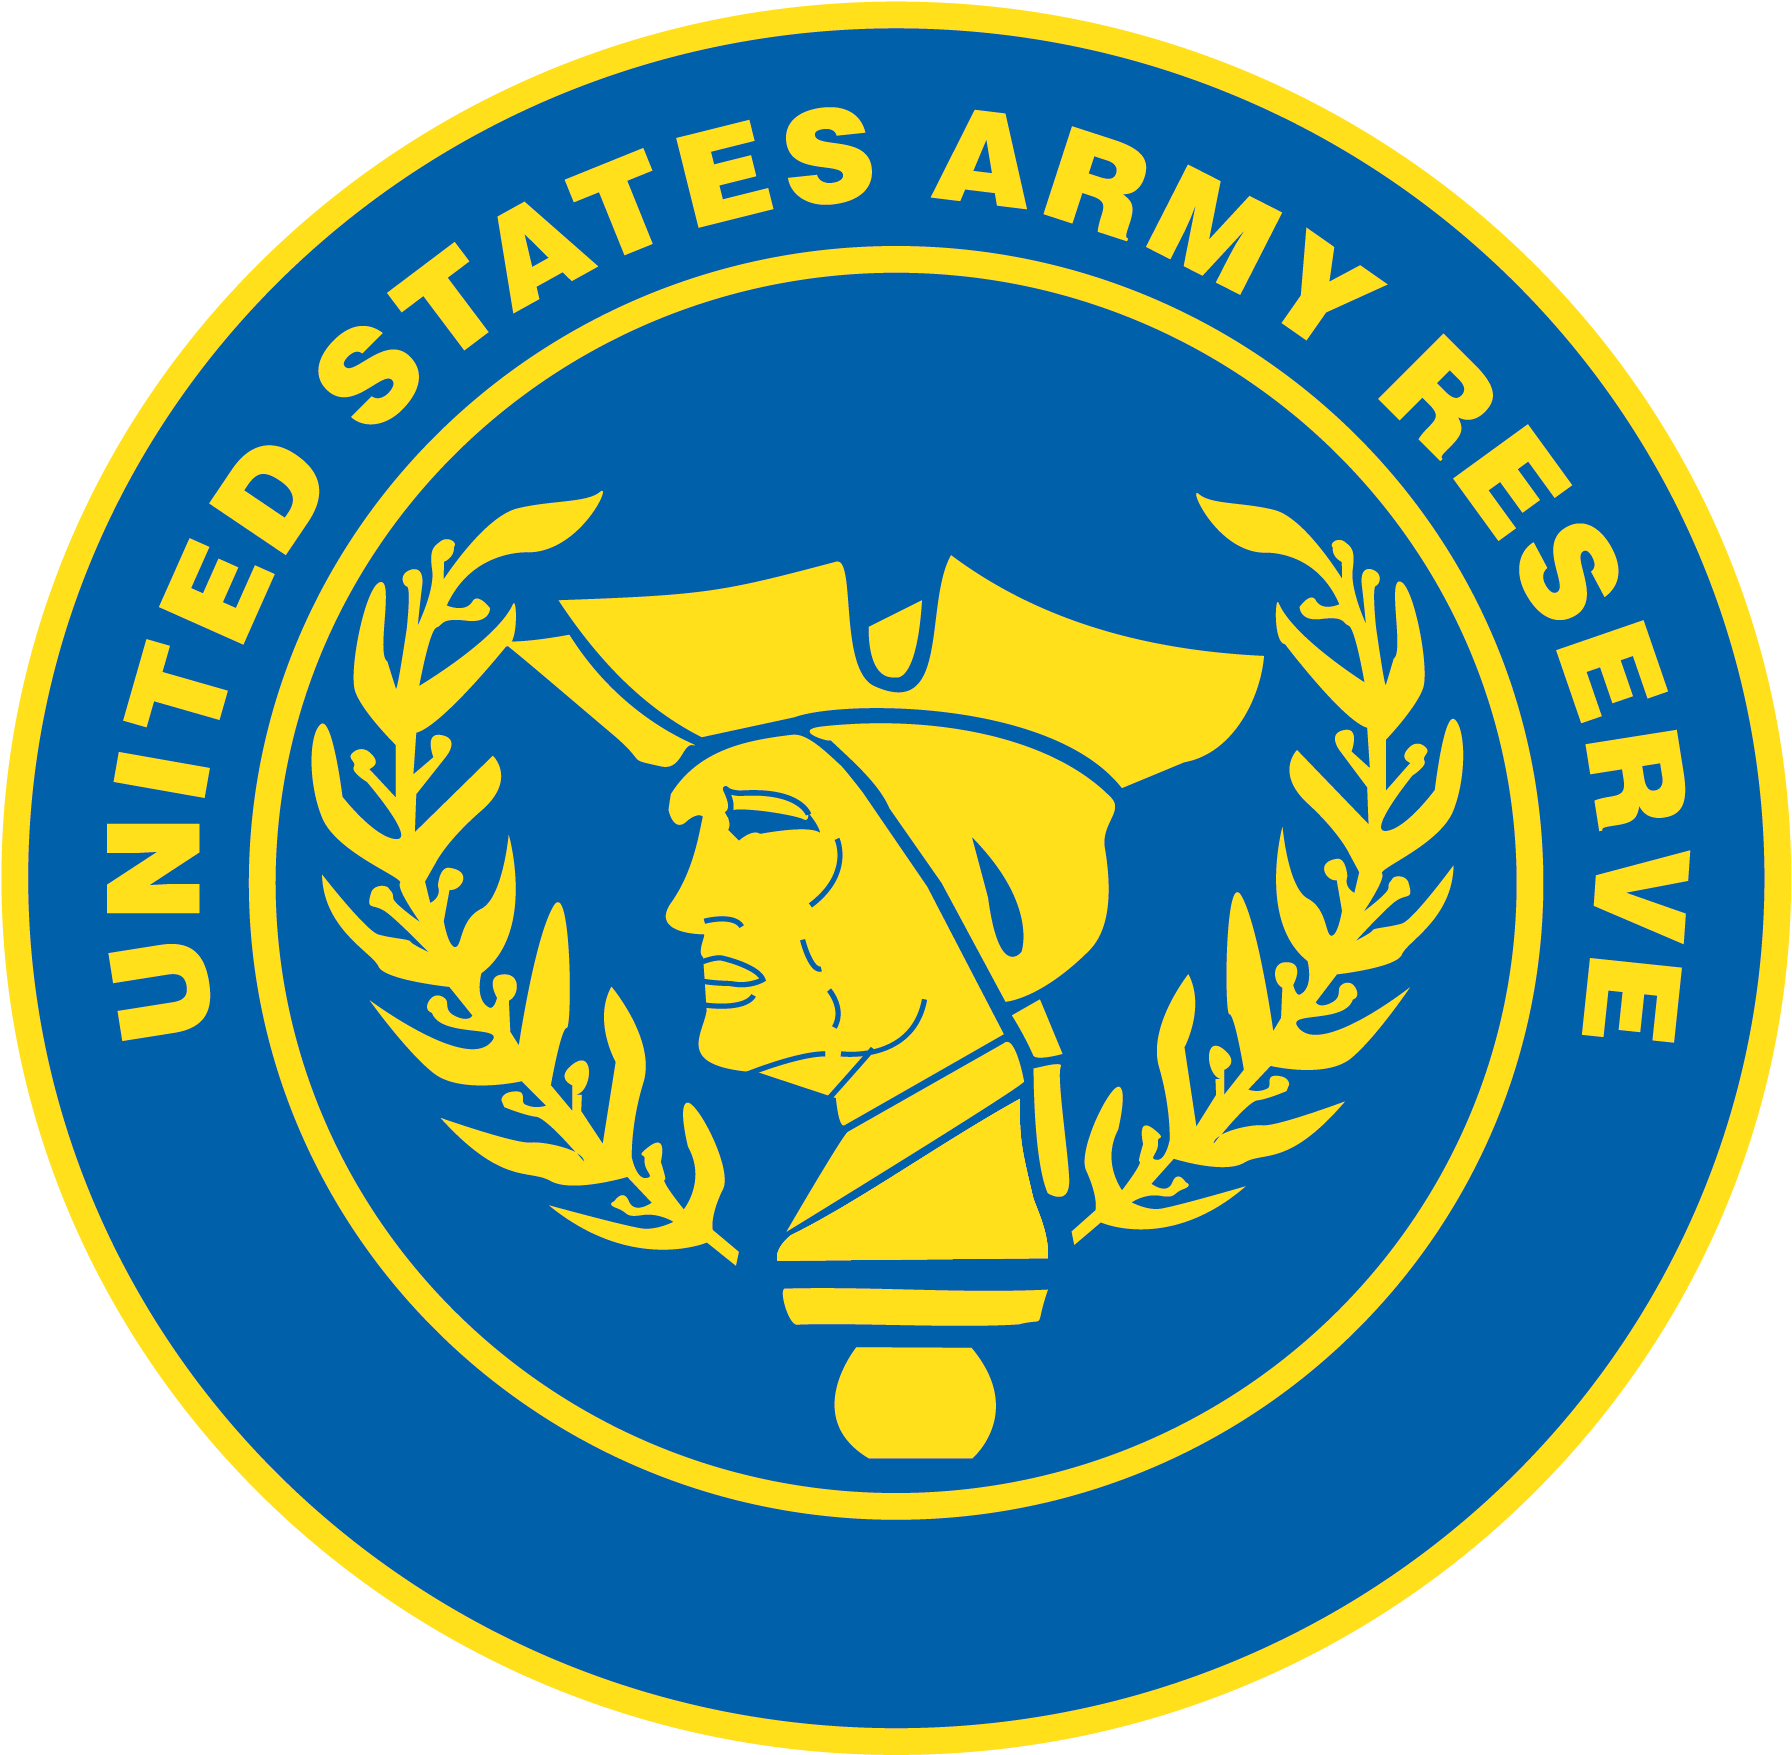 United States Army Reserve (2953x3217)